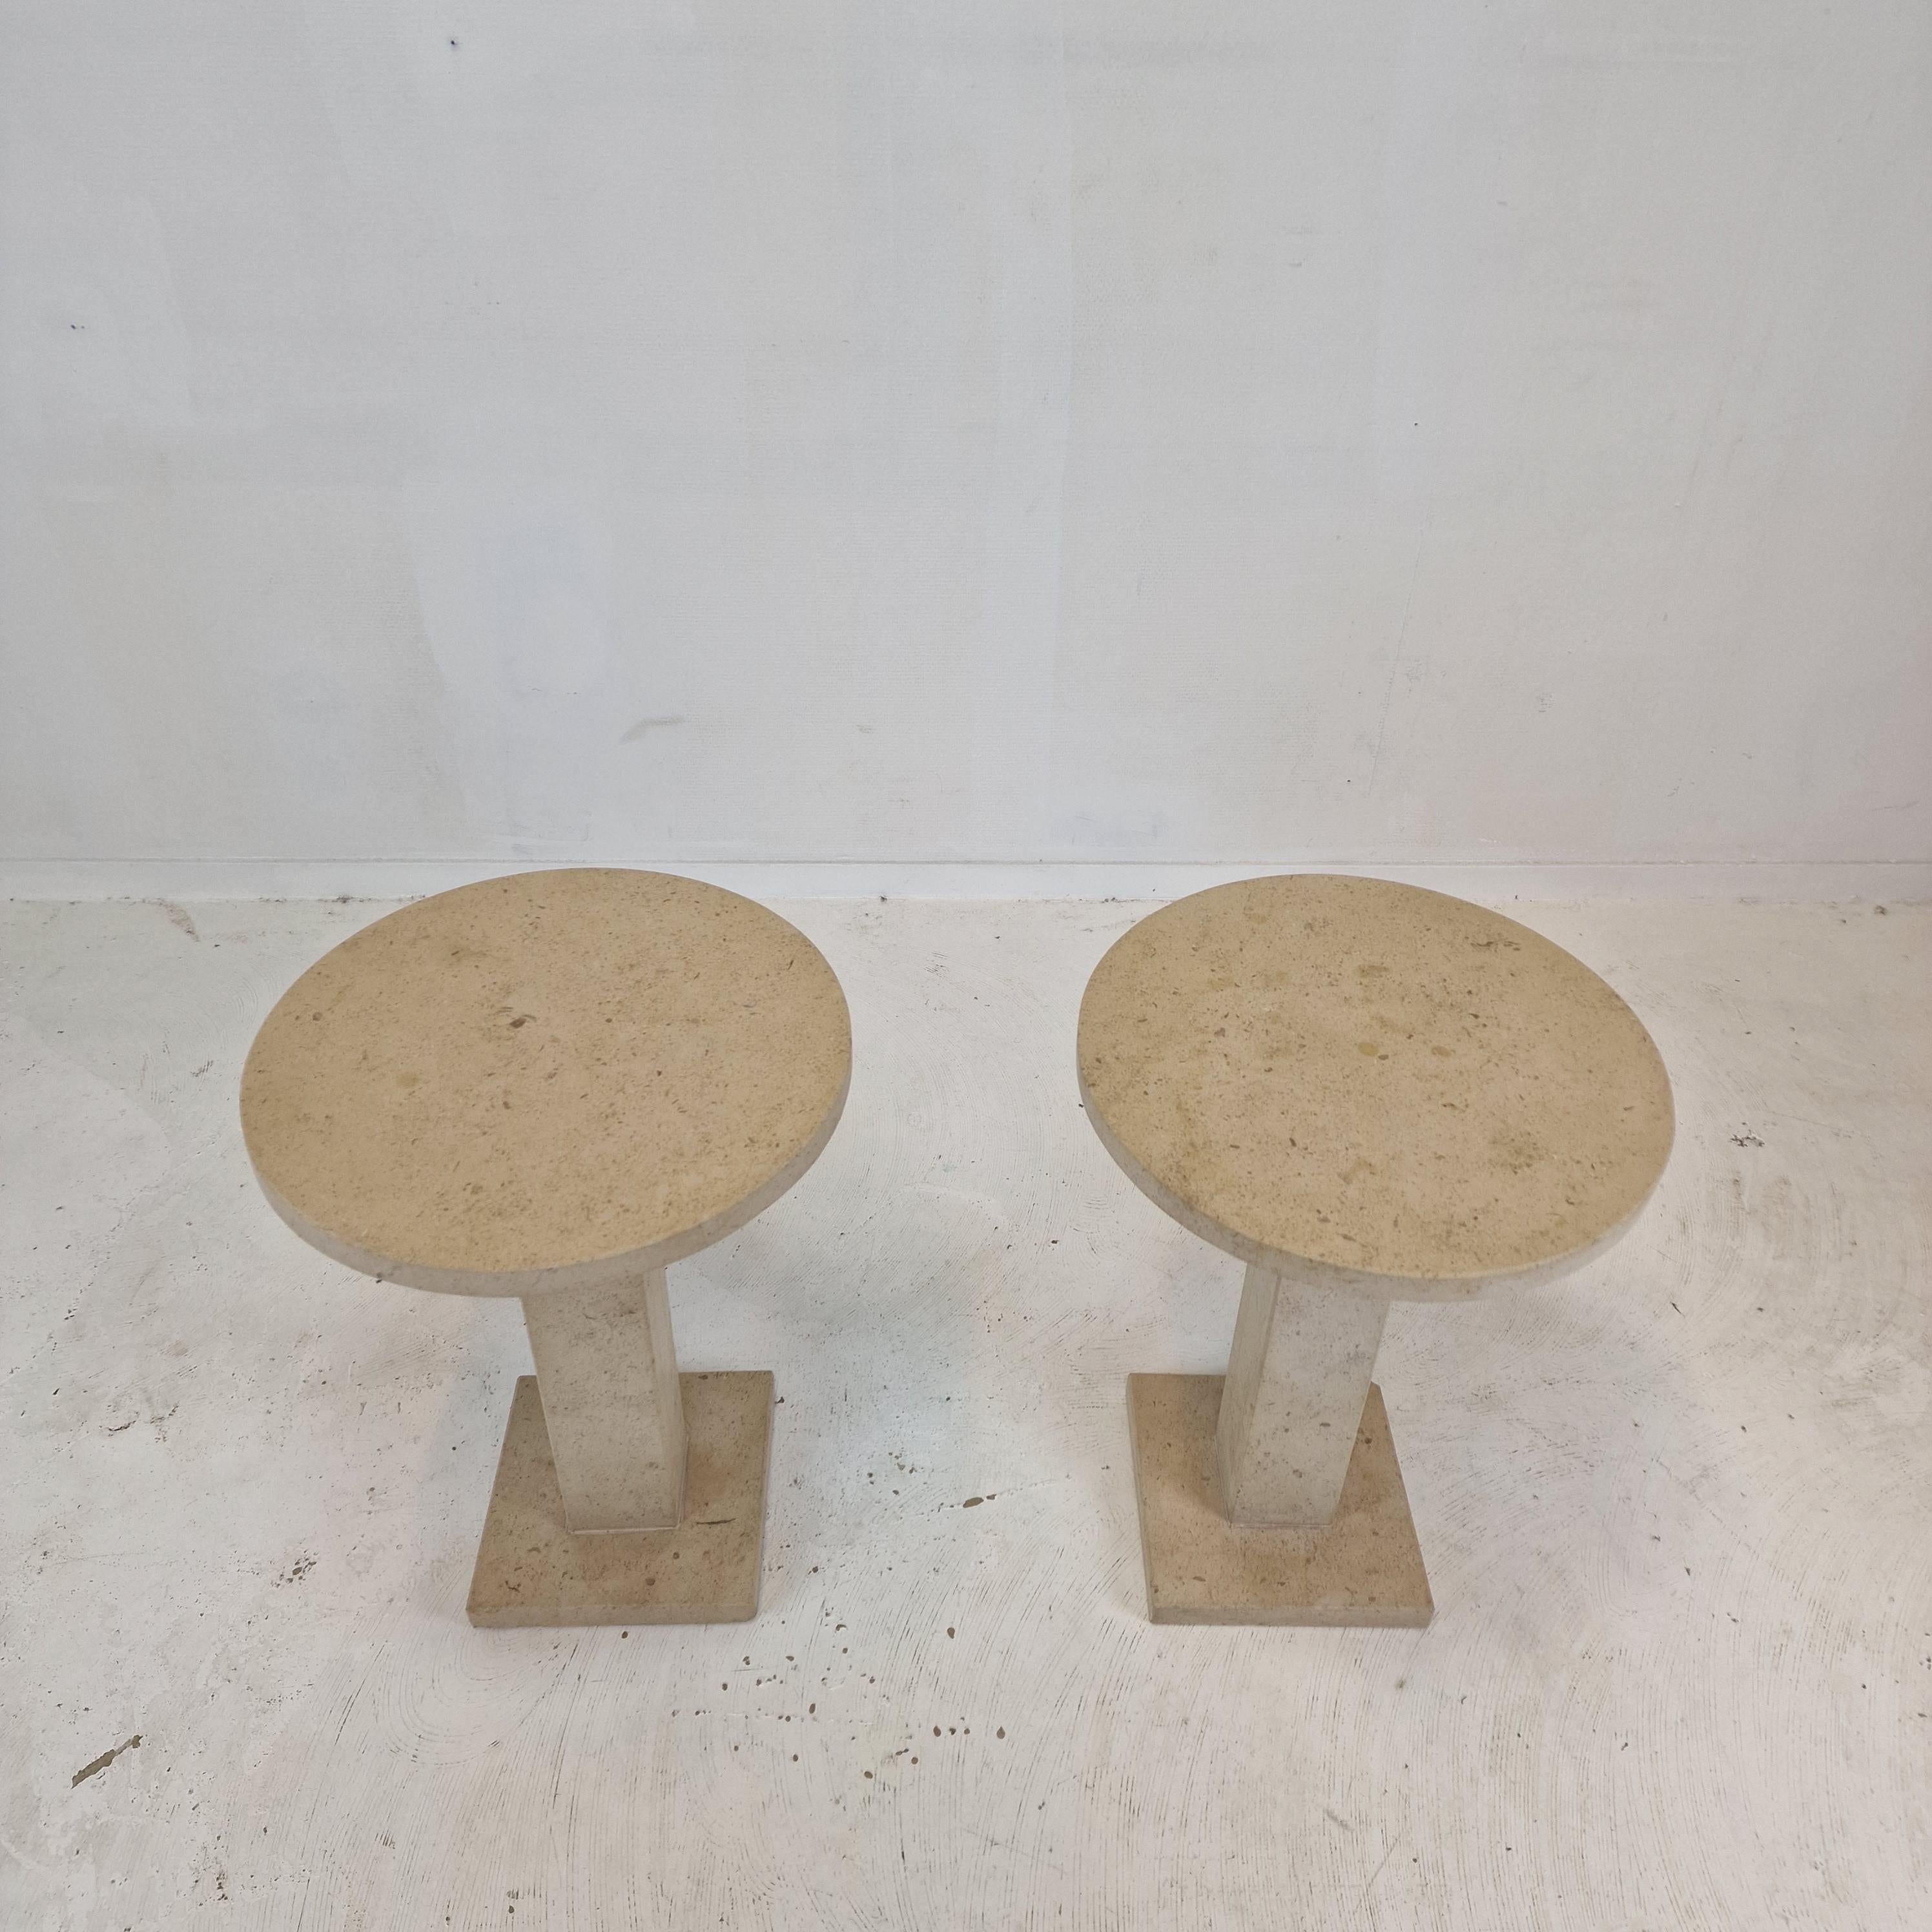 Late 20th Century Set of 2 Italian Travertine or Stone Pedestals or Side Tables, 1980s For Sale